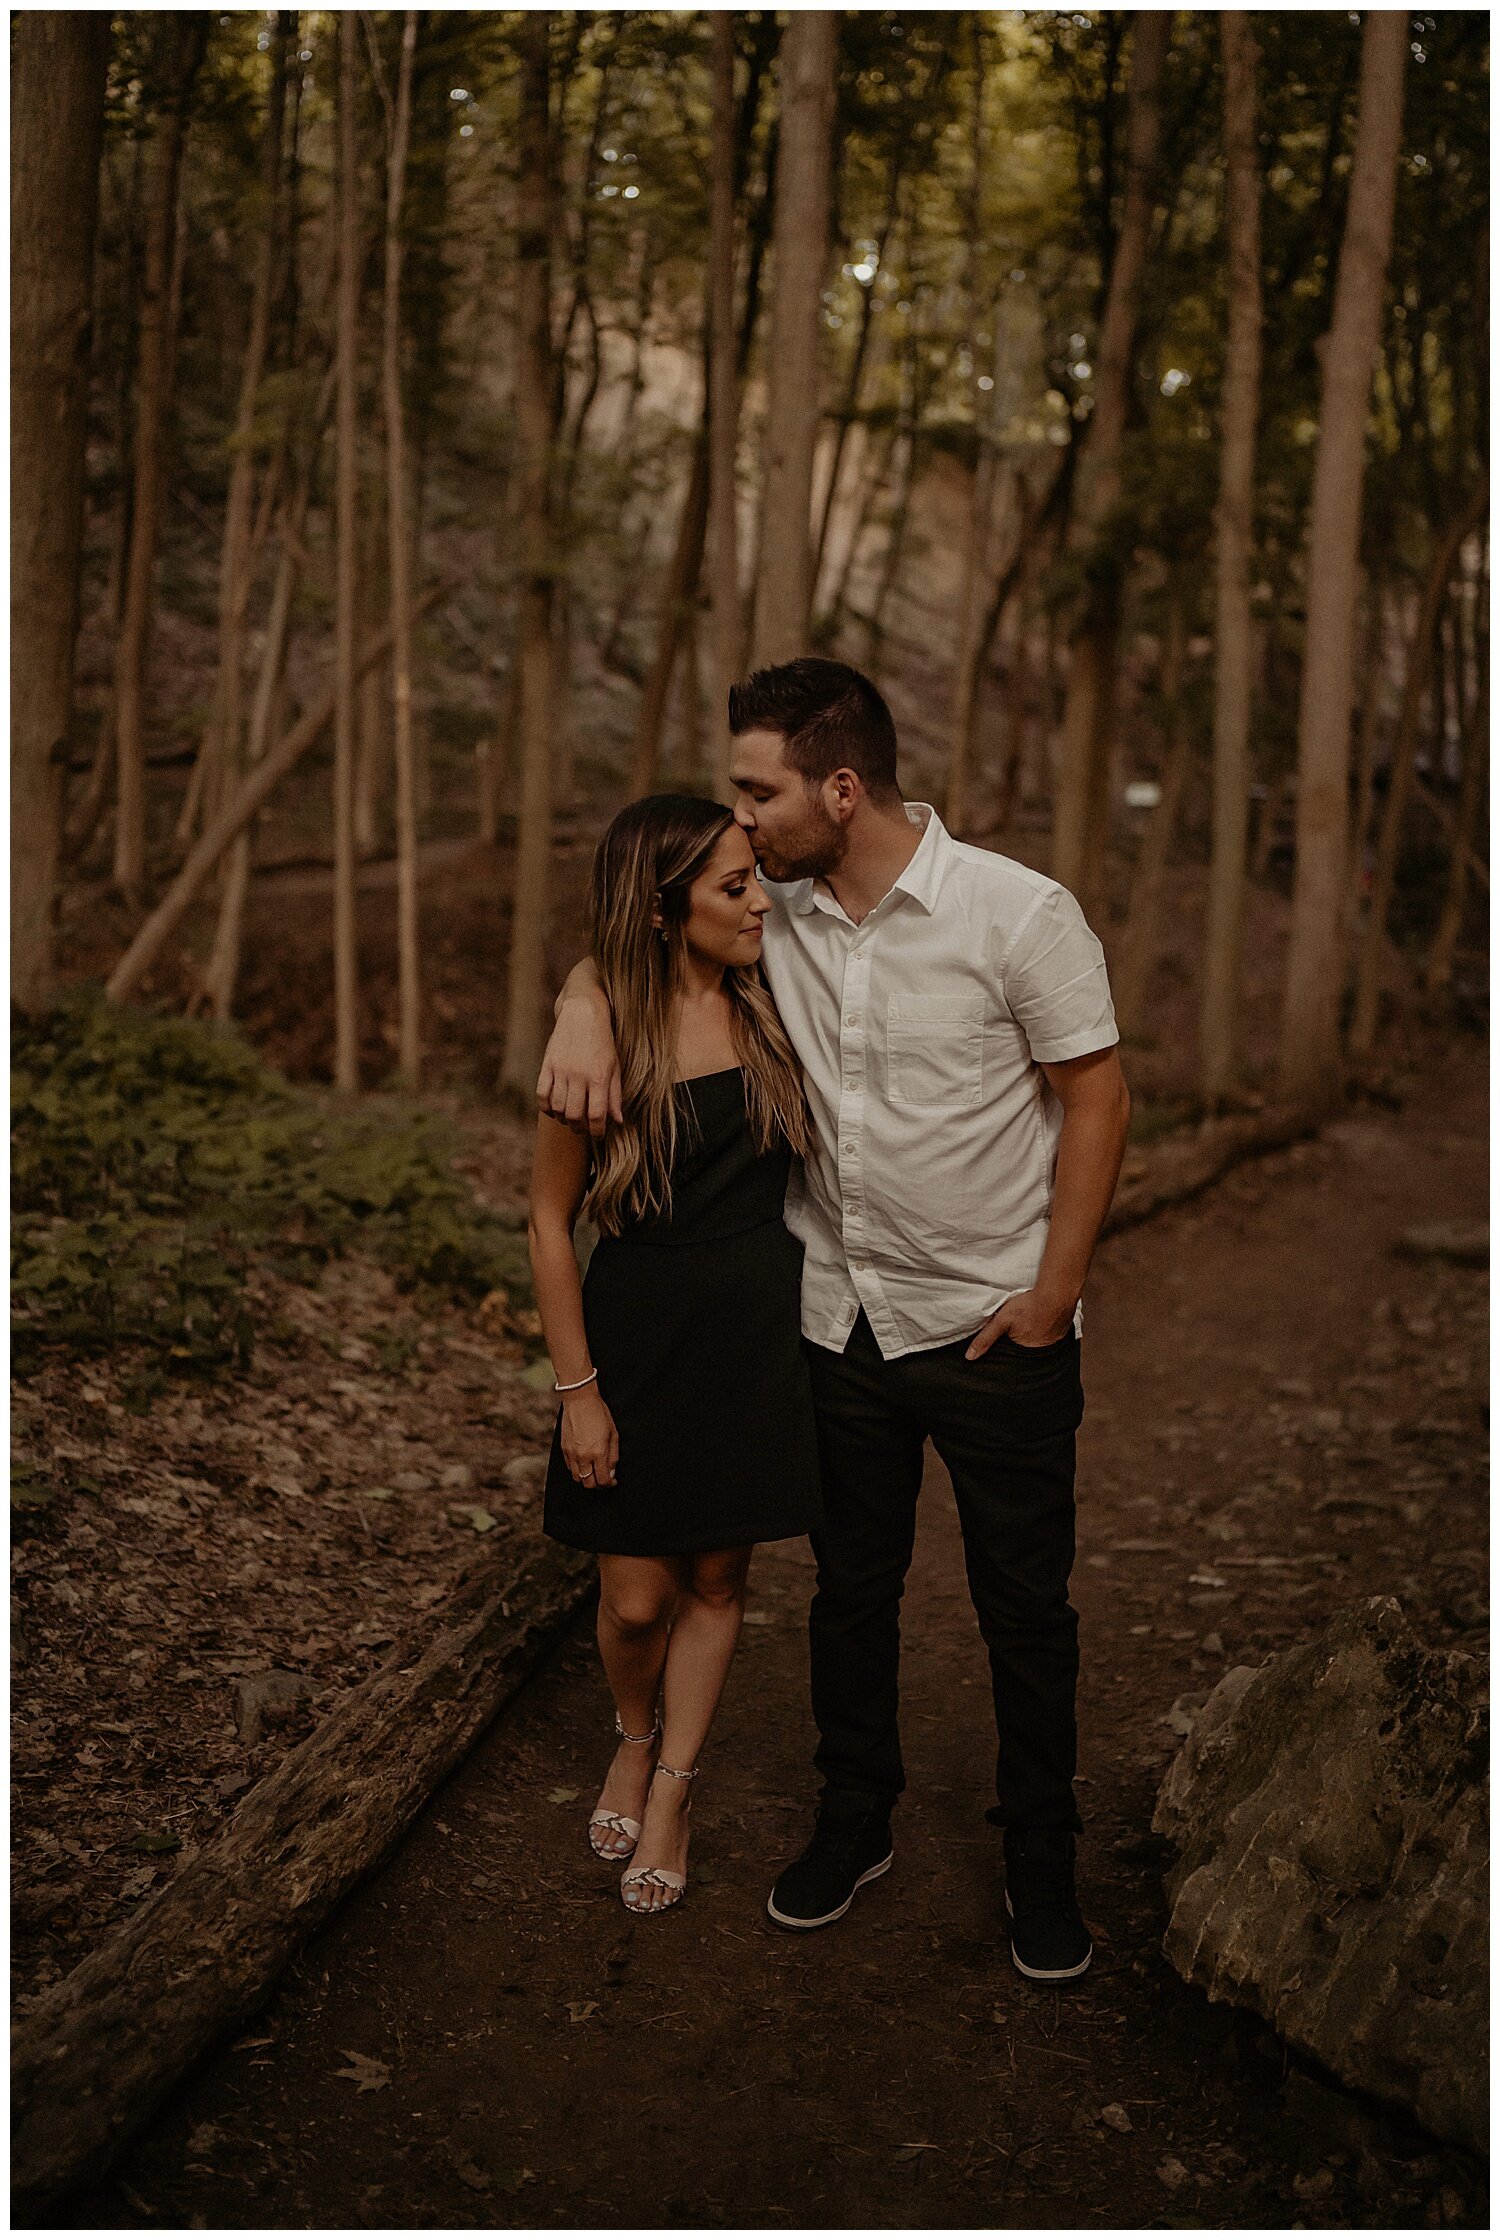 Cotton_Factory_And_Waterfall_Engagement_Session_Hamilton_Ontario_Wedding_Photographer_0100.jpg